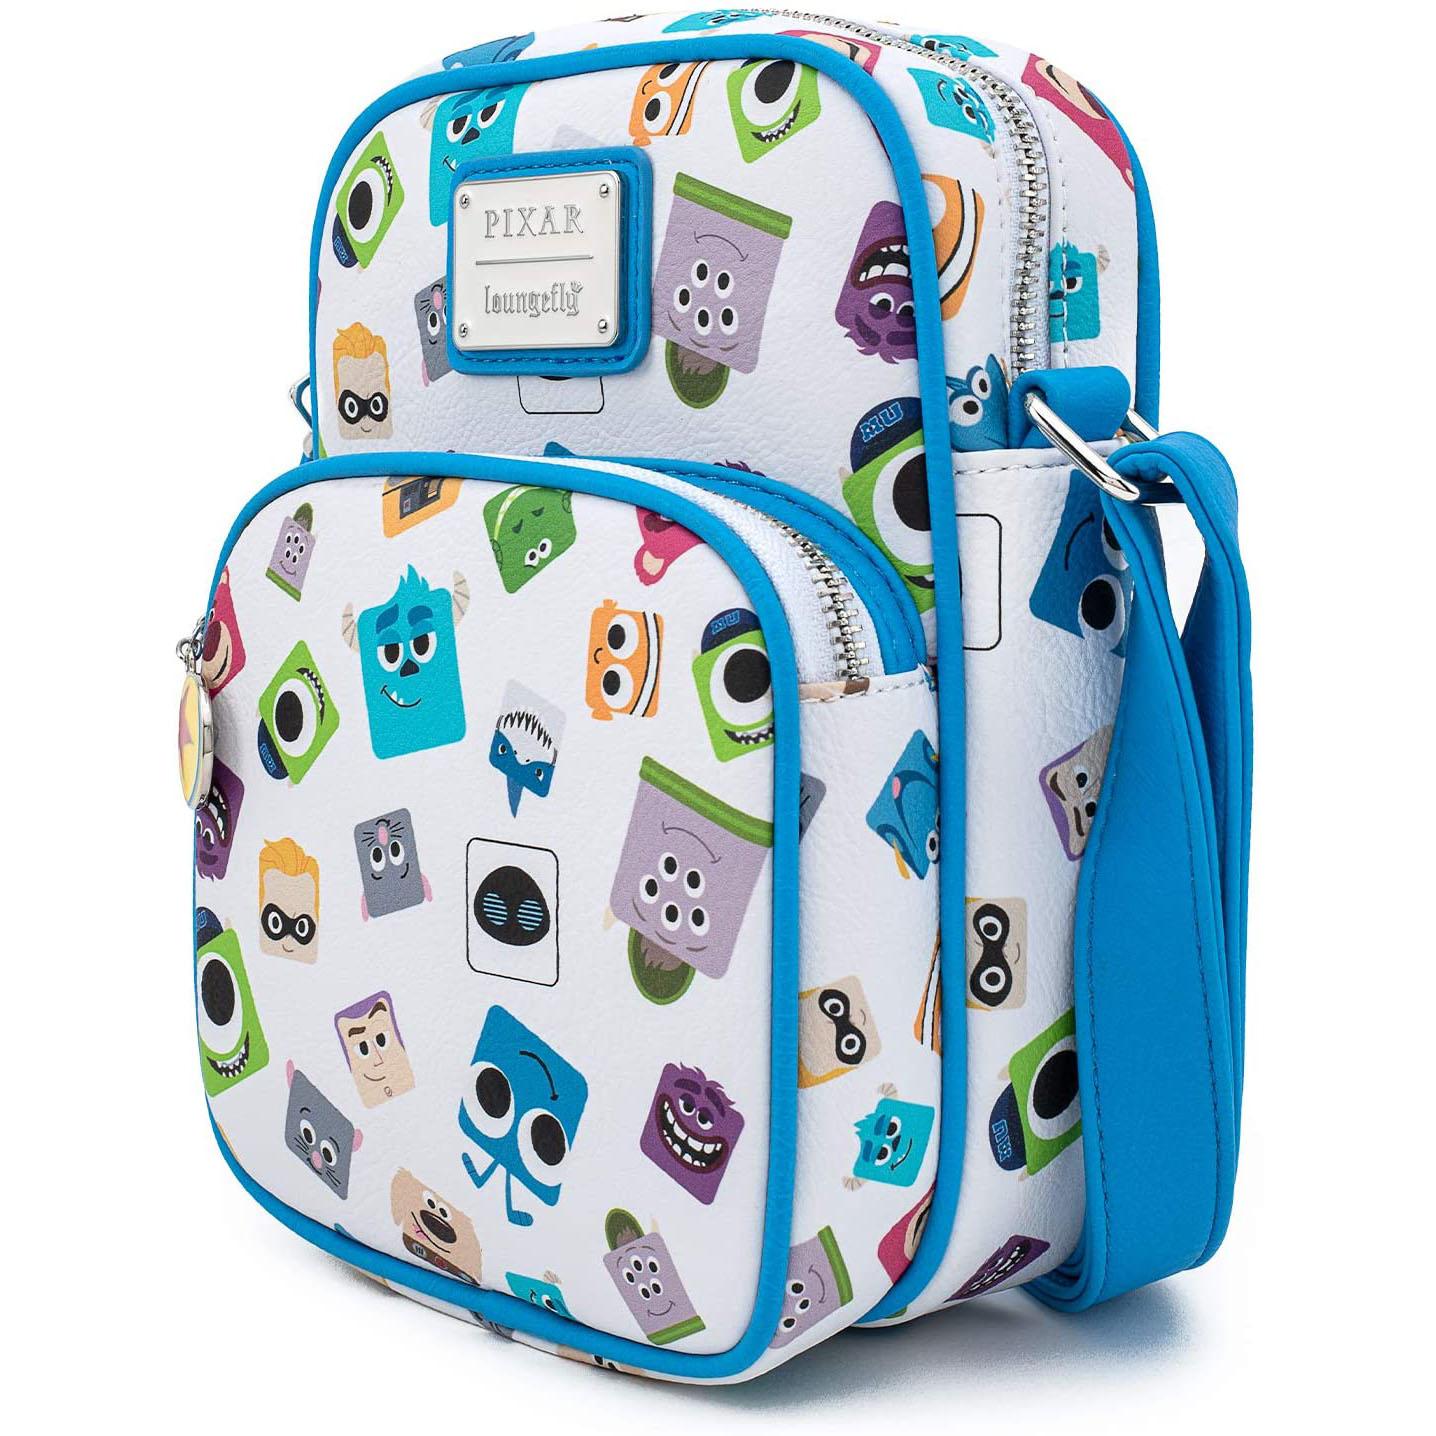 Funko Loungefly Pixar Collection Pixar Character Crossbody Bag for $38.50 Shipped